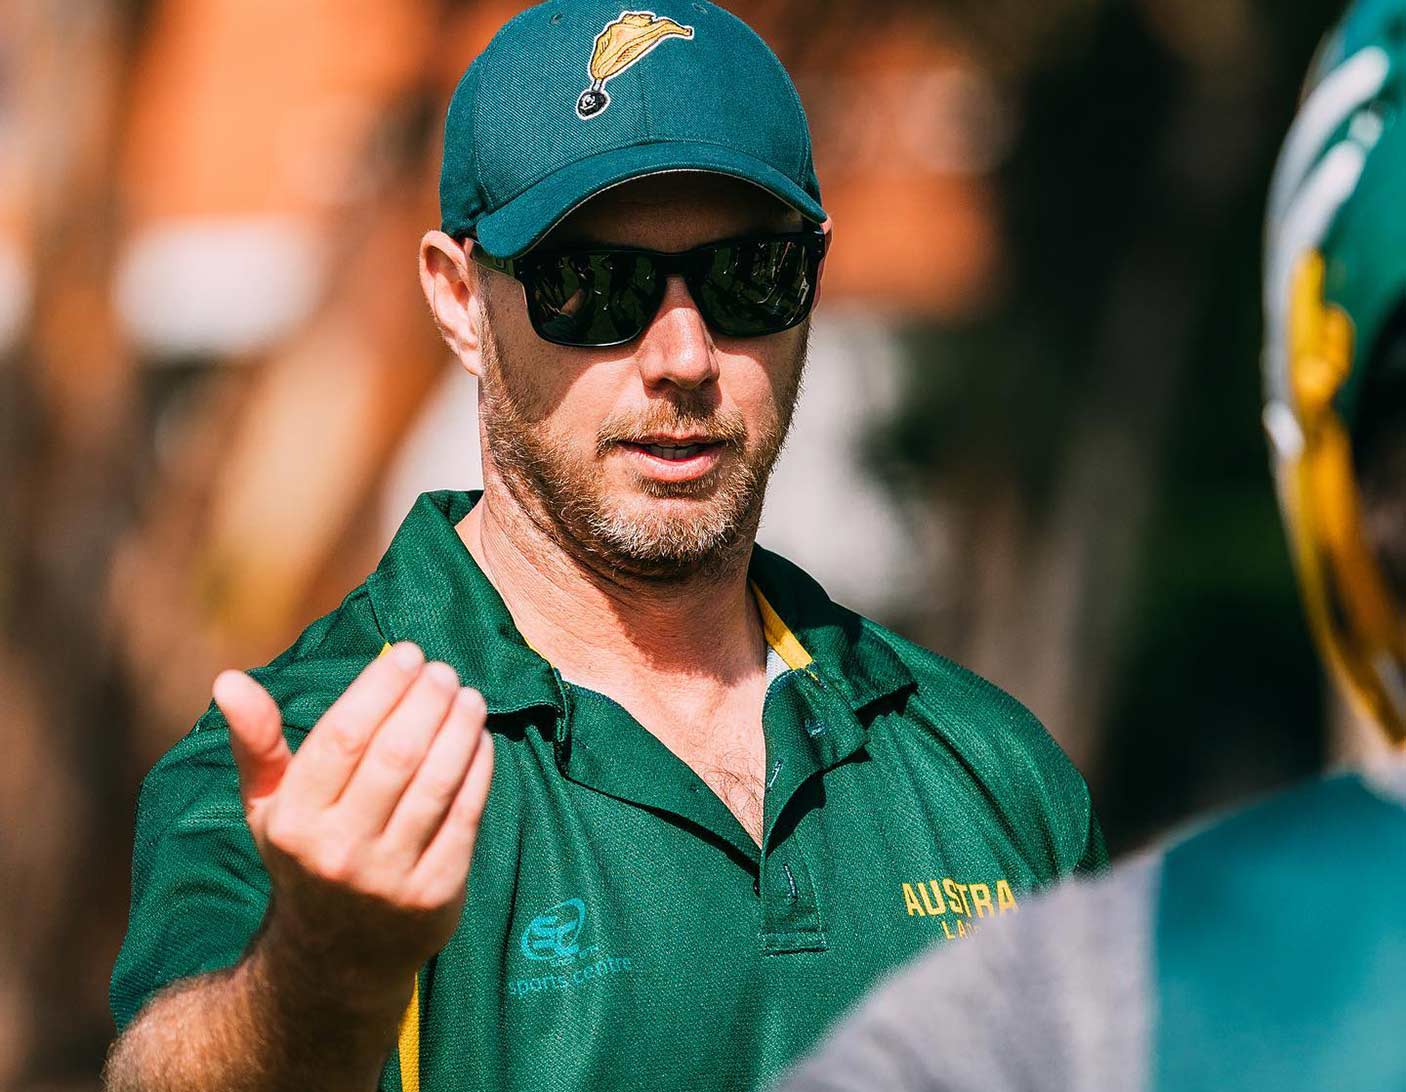 A lacrosse coach gesturing with his hand to a player